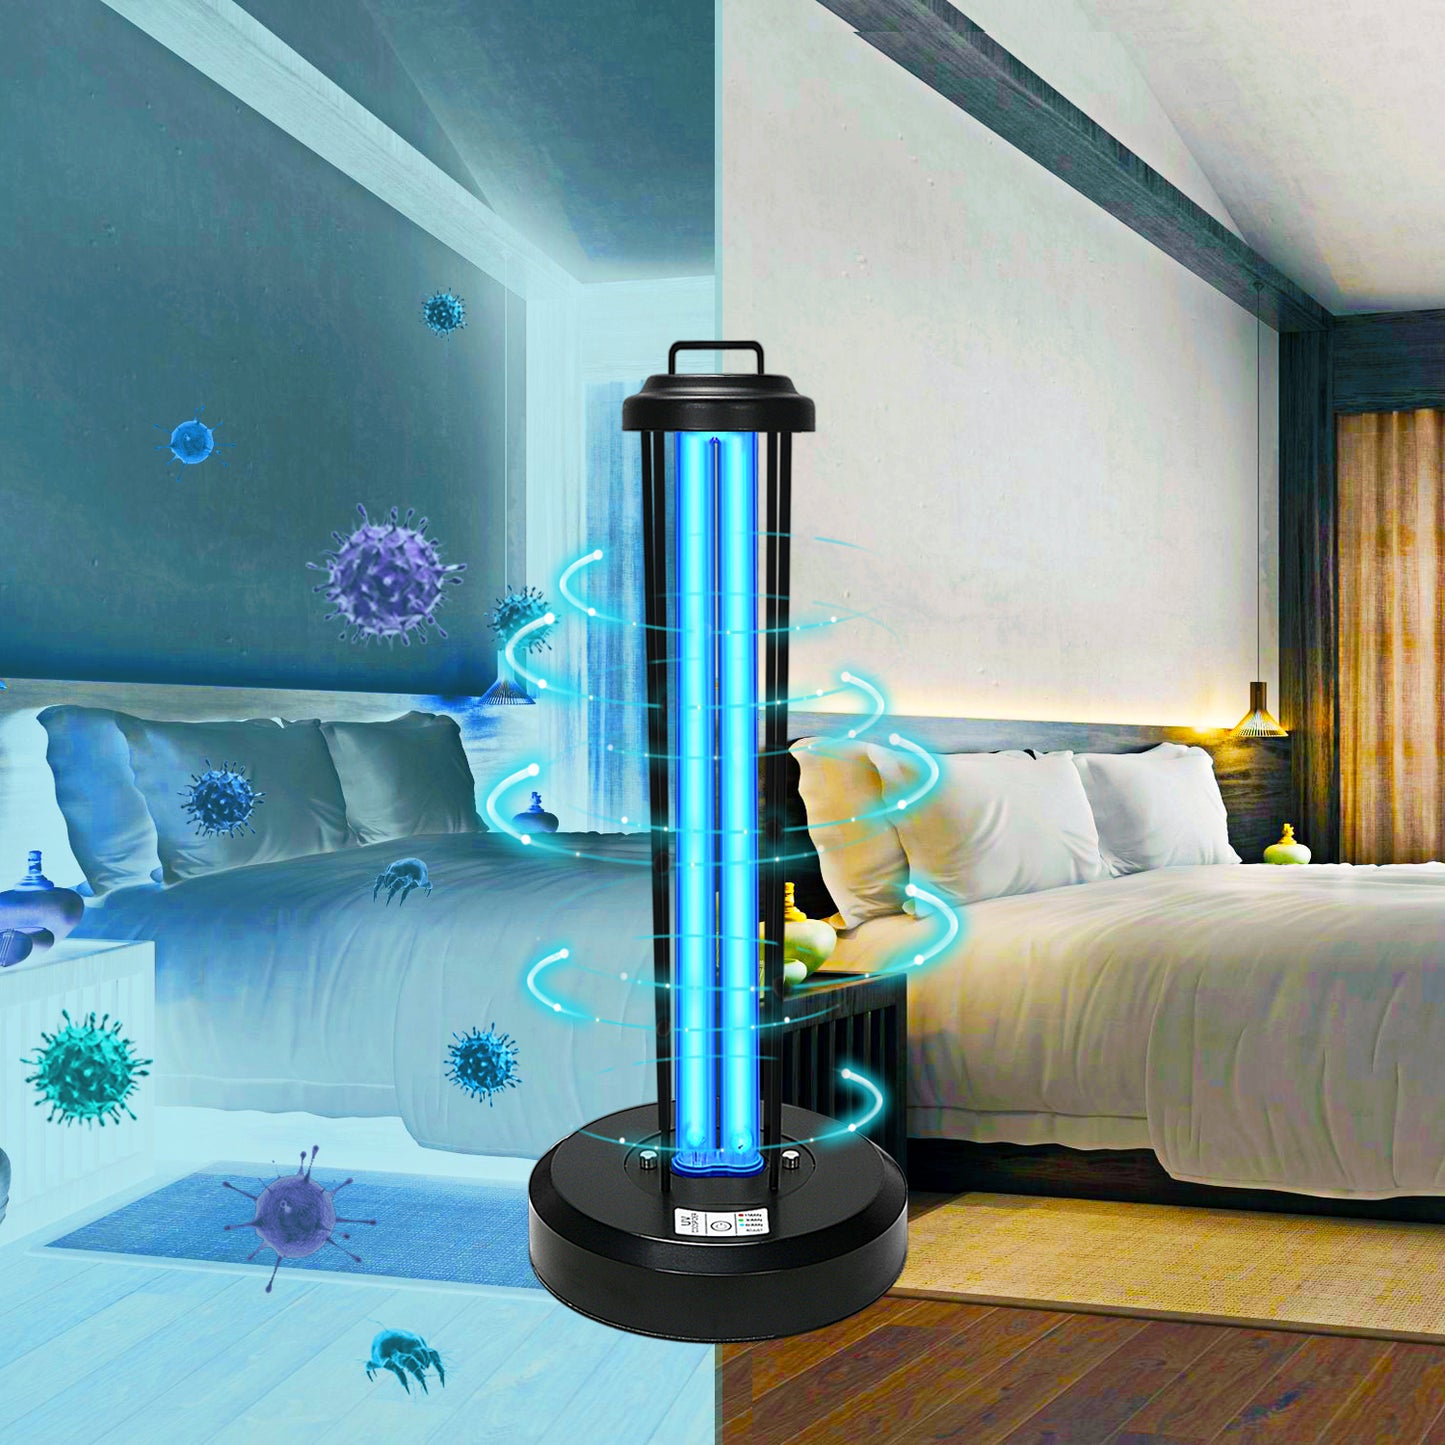 COOSPIDER UV Germicidal Light, Remote Control Timer 15/30/60 minutes 110V 38W Table Lamp, Kills Germs and Bacteria (Ozone-free CTUV-38) New Arrival